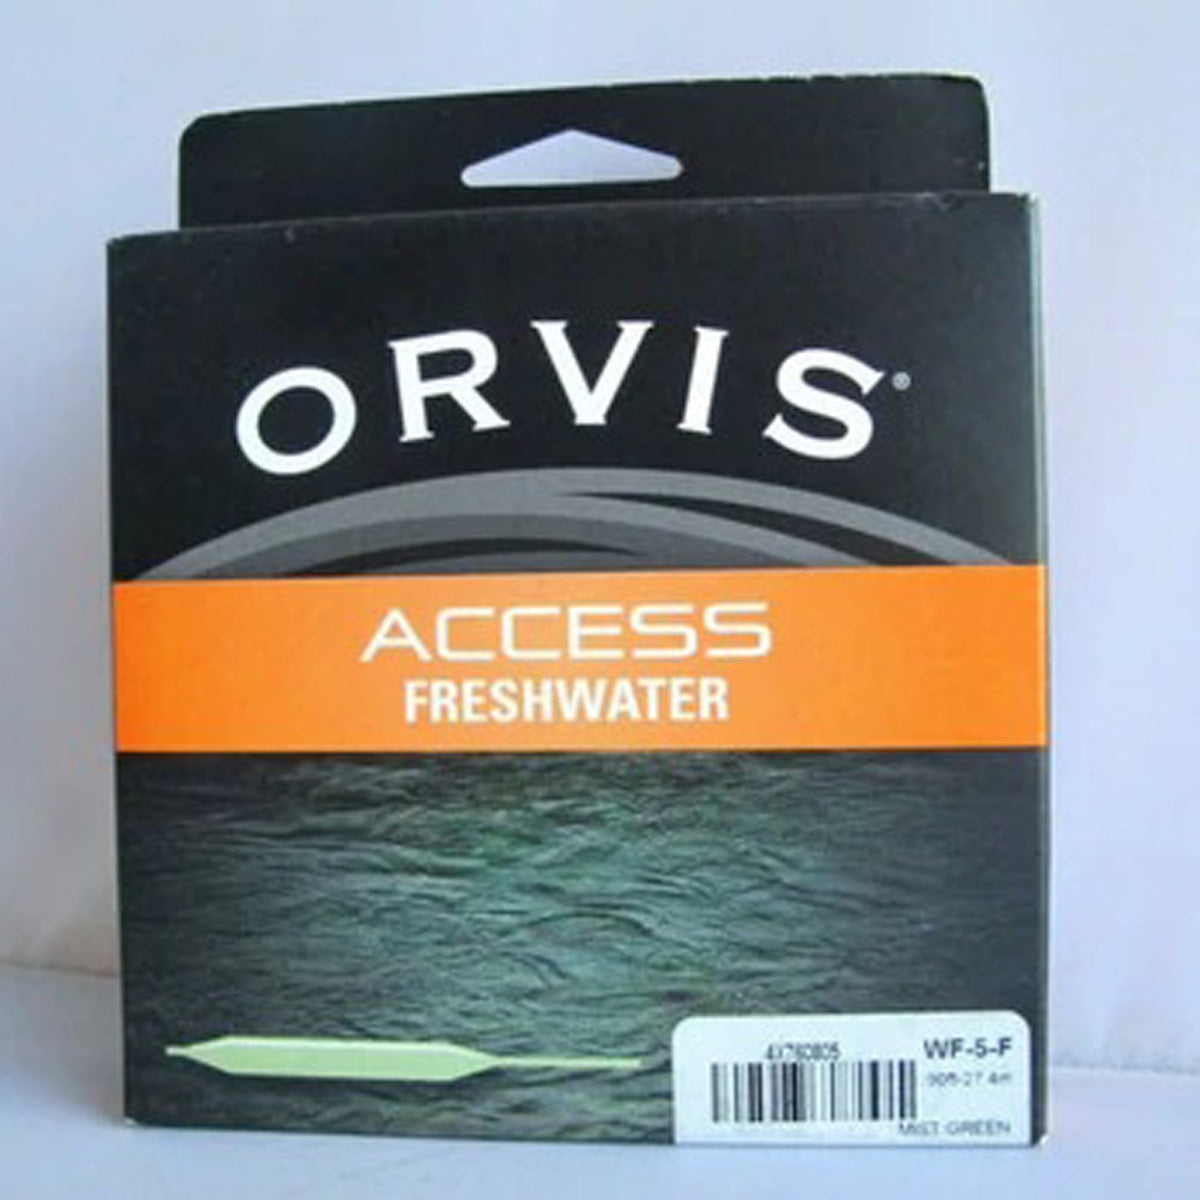 Orvis Access Freshwater Fly Line